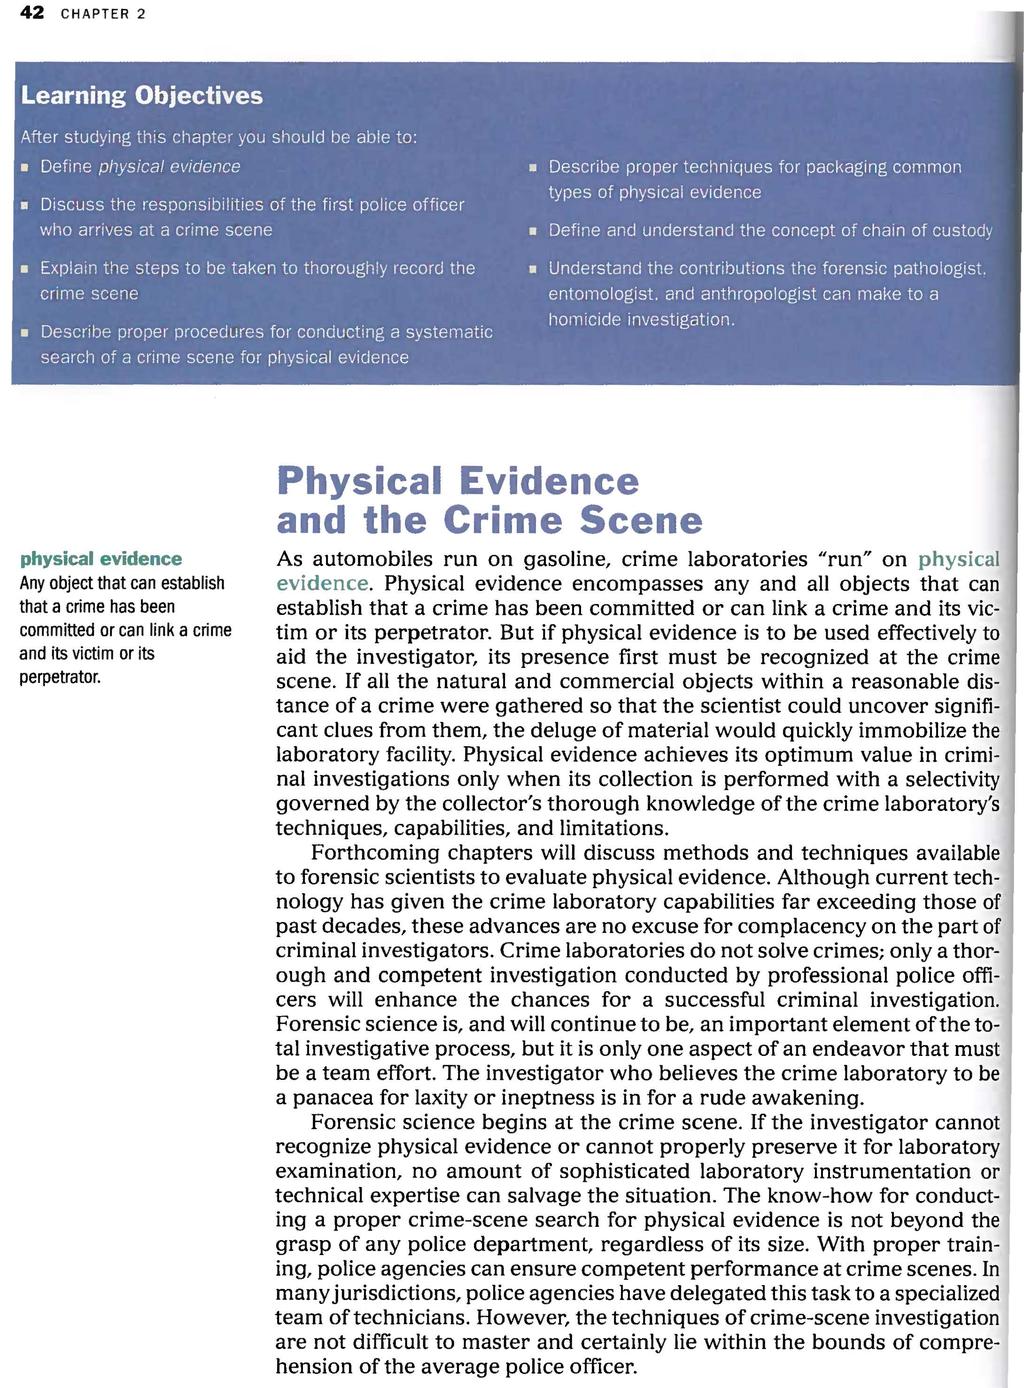 42 C H A PTER 2 Learning Objectives After studying this chapter you should be able to: Define physical evidence Discuss the responsibilities of the first police officer who arrives at a crime scene